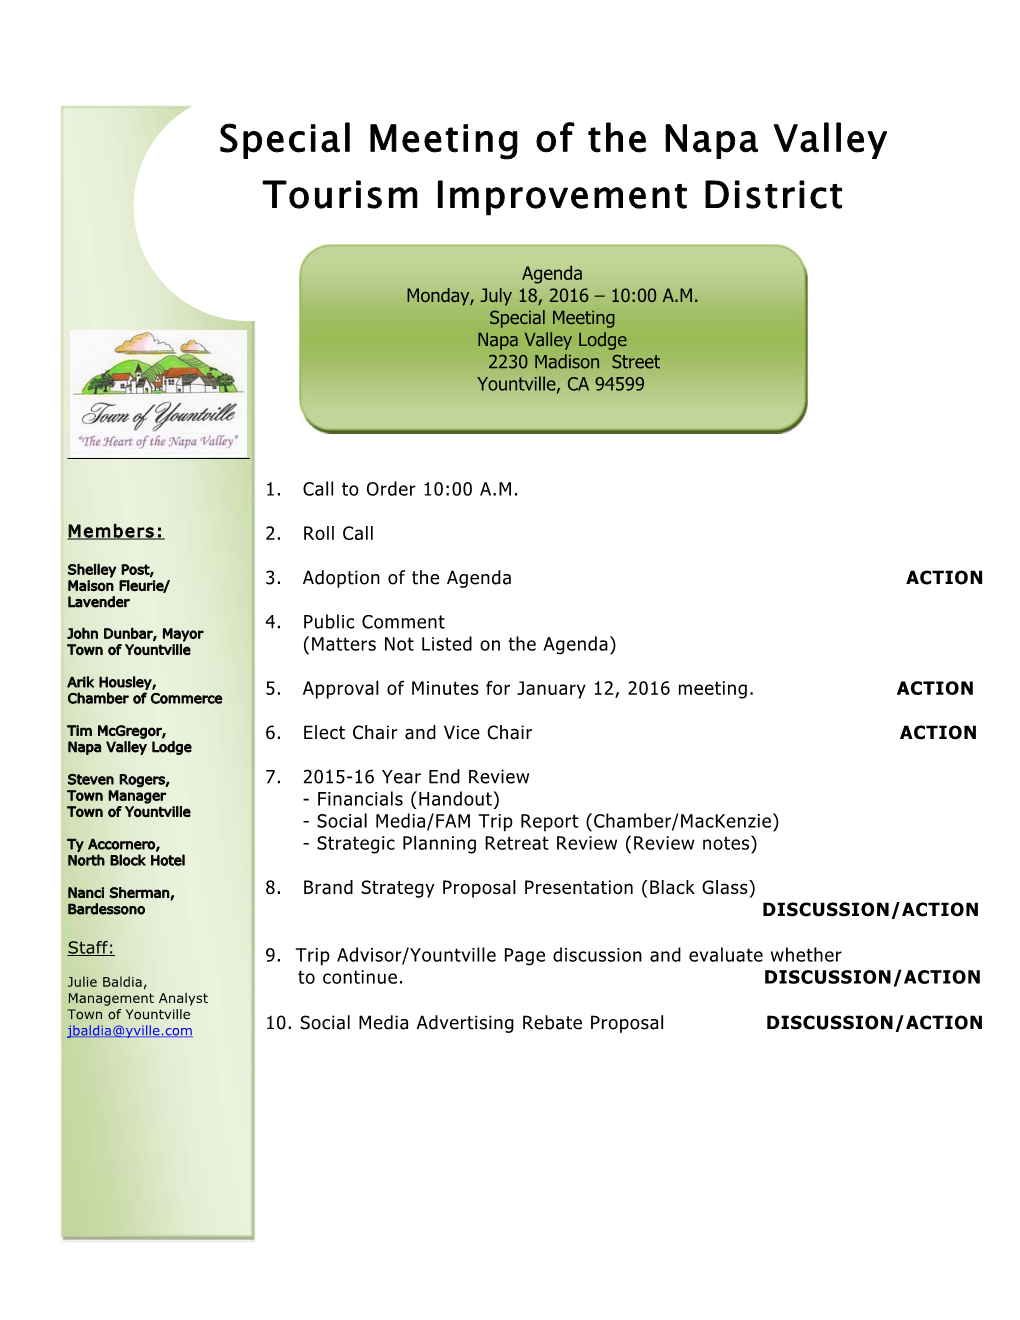 Special Meeting of the Napa Valley Tourism Improvement District